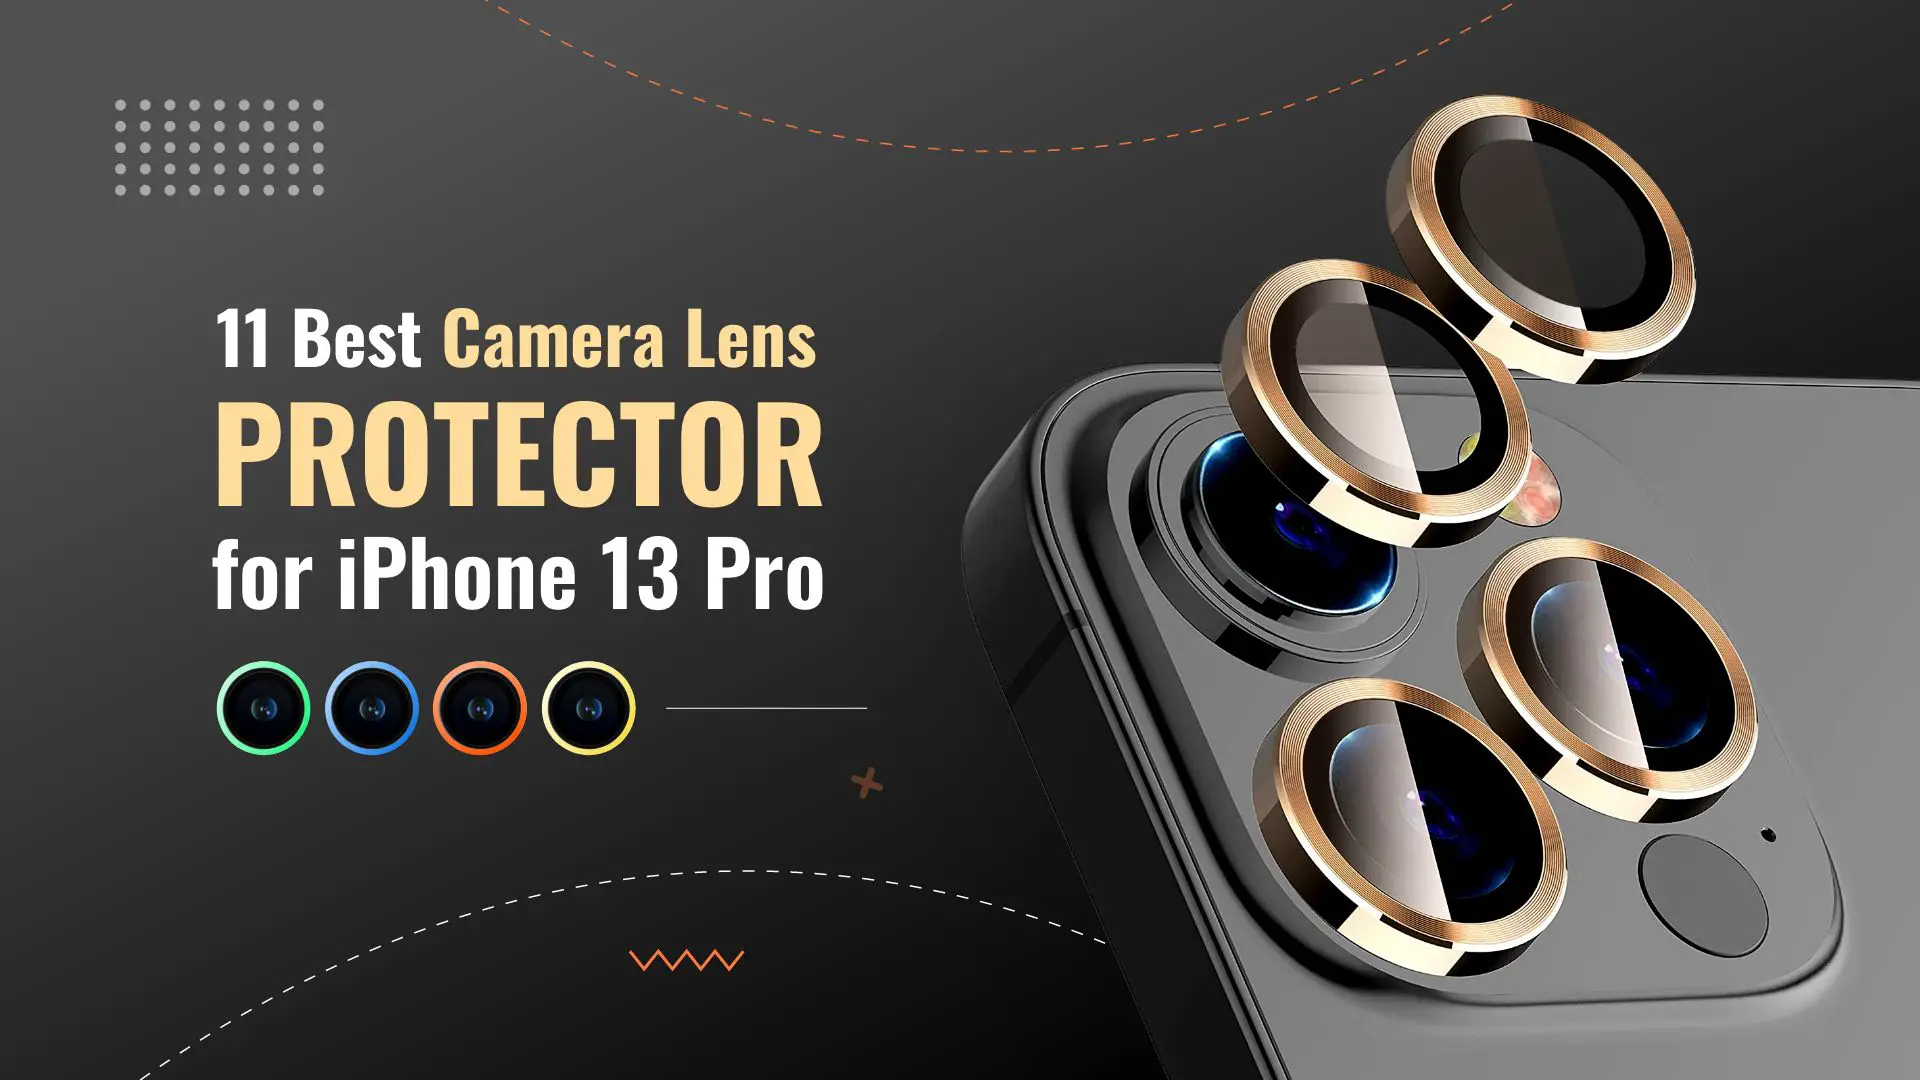 11 Best Camera Lens Protector for iPhone 13 Pro